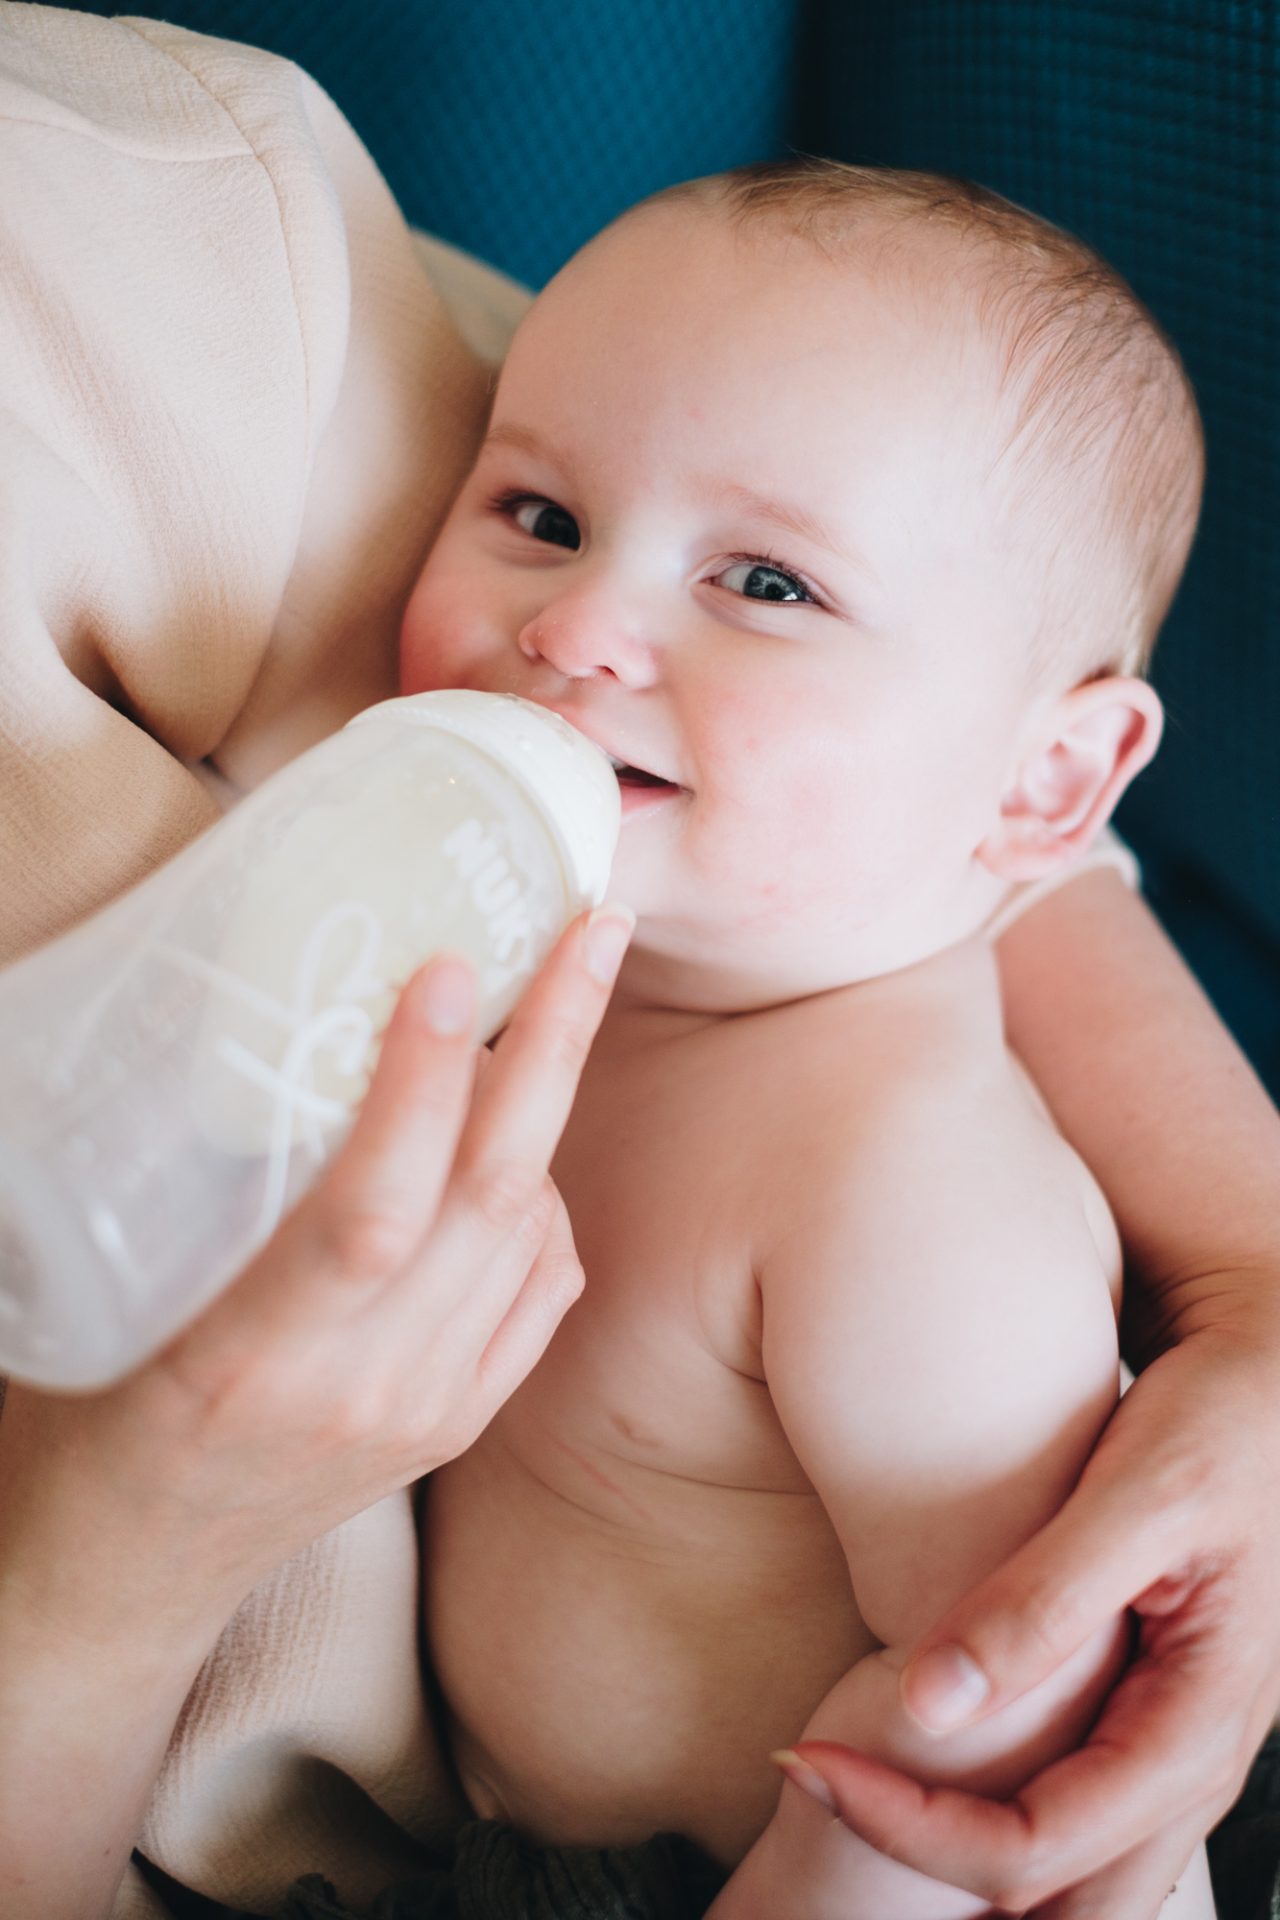 Baby looking directly at camera and smiling while trying to be fed a bottle